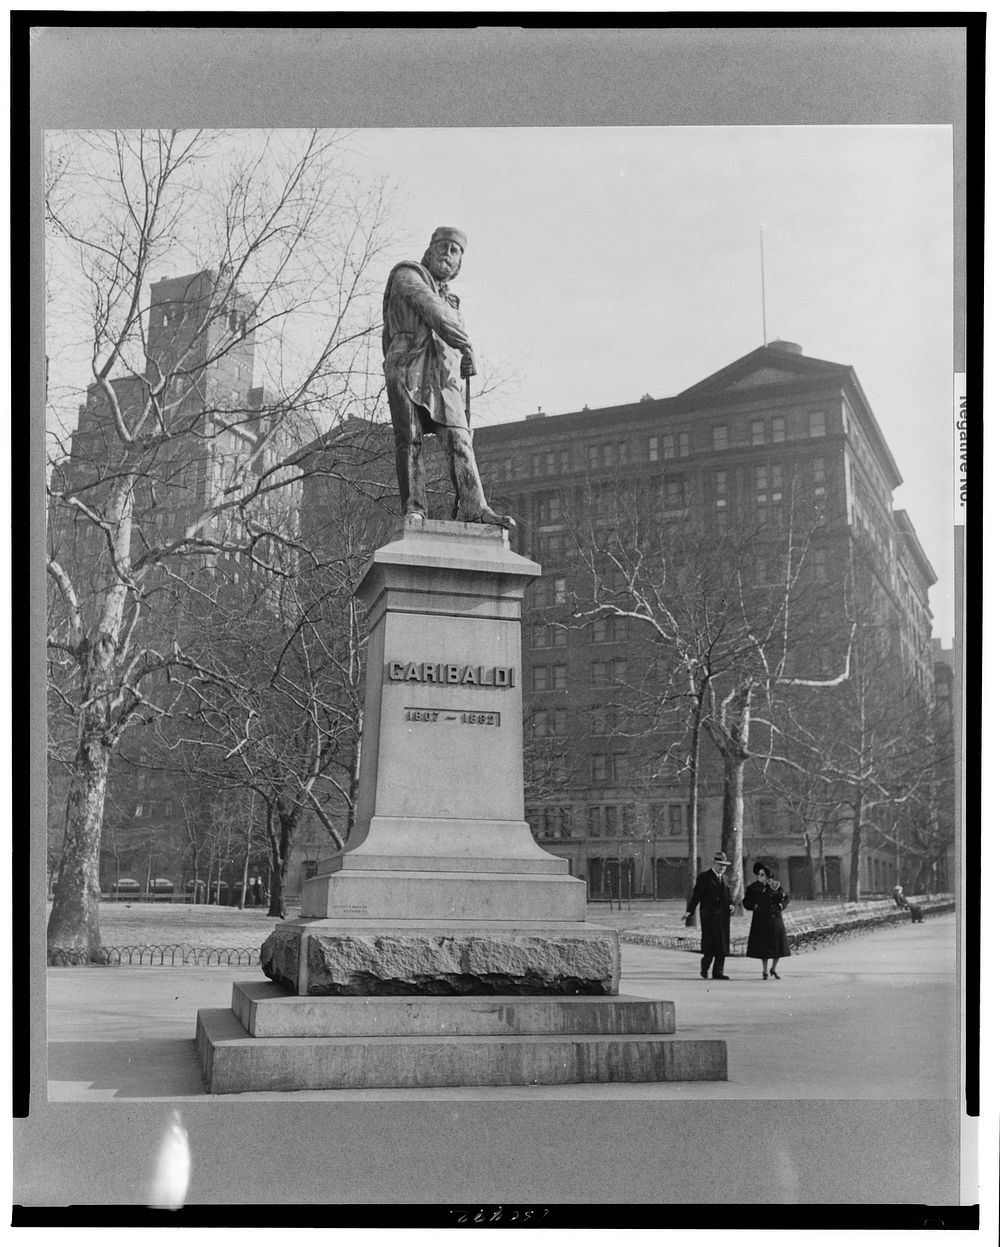 New York, New York. Statue of Garibaldi on Washington Square. Sourced from the Library of Congress.